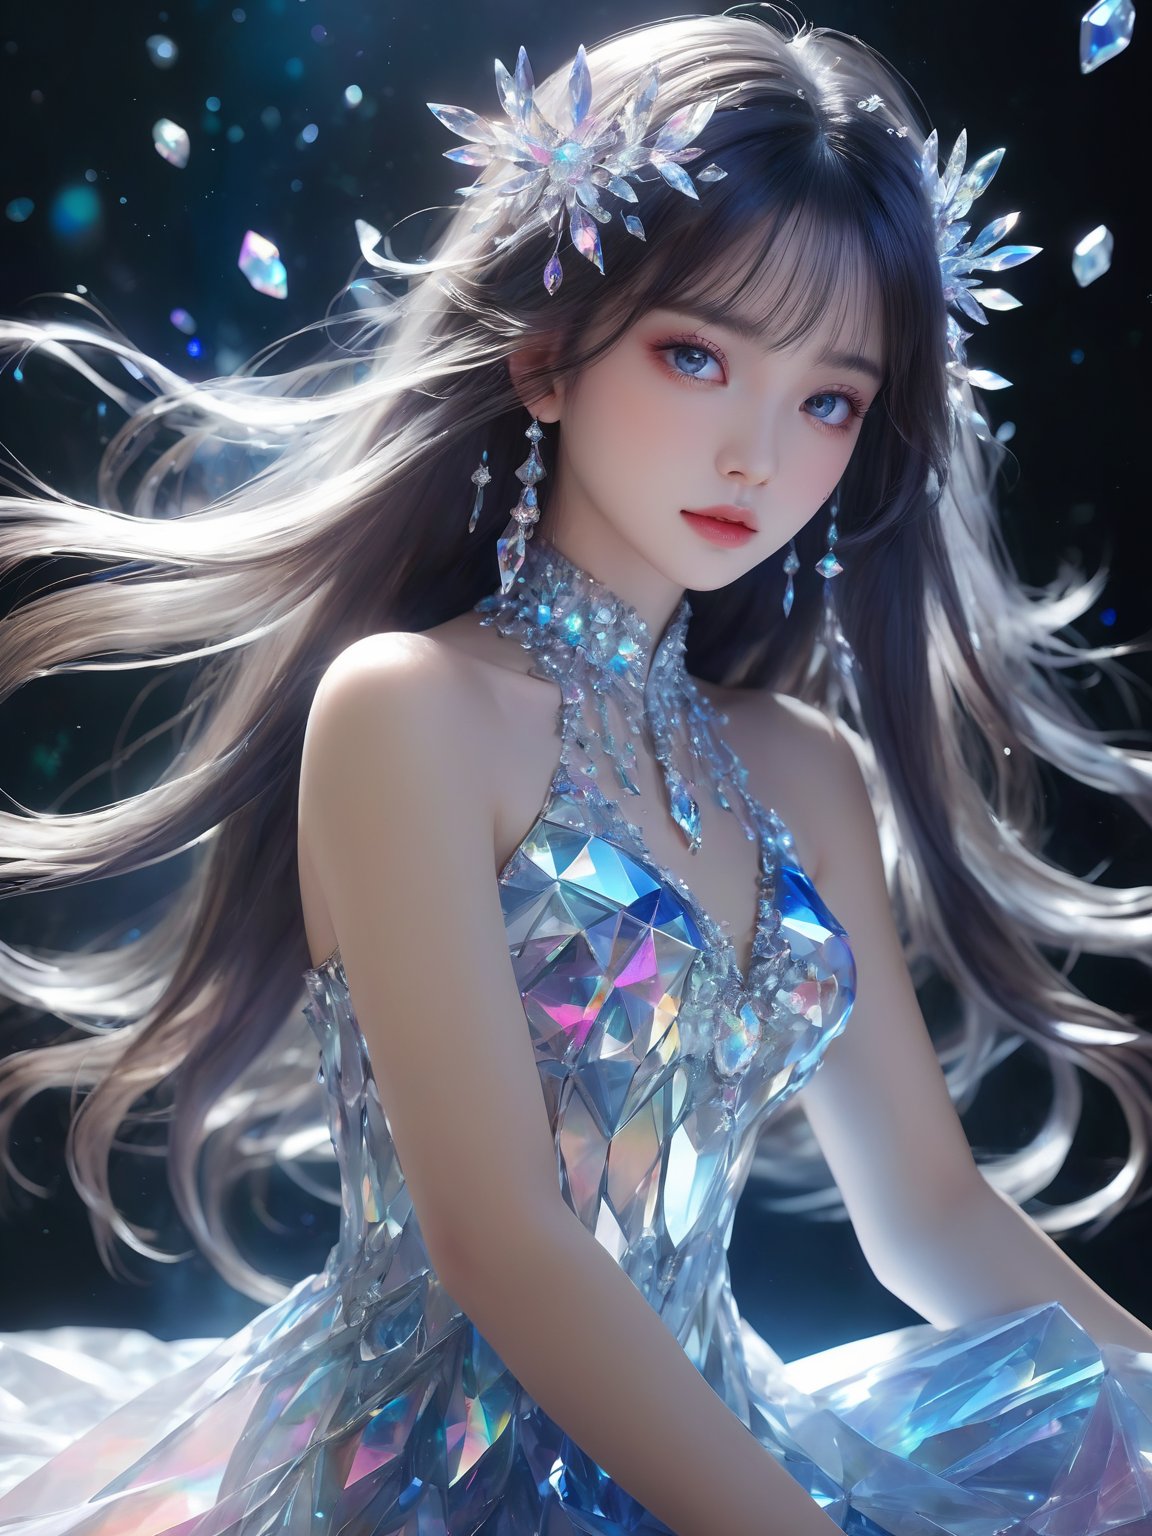 masterpiece,best quality,masterpiece,best quality,official art,extremely detailed CG unity 16k wallpaper,masterpiece,((1girl)),(science fiction:1.1),(ultra-detailed crystallization:1.5),(crystallizing girl:1.5),kaleidoscope,((iridescent:1.5) long hair),(glittering silver eyes),sitting,surrounded by colorful crystals,blue skin,(skin fusion with crystal:1.8),looking up,face focus,simple dress,transparent crystals,flat dark background,lens flare,prism,